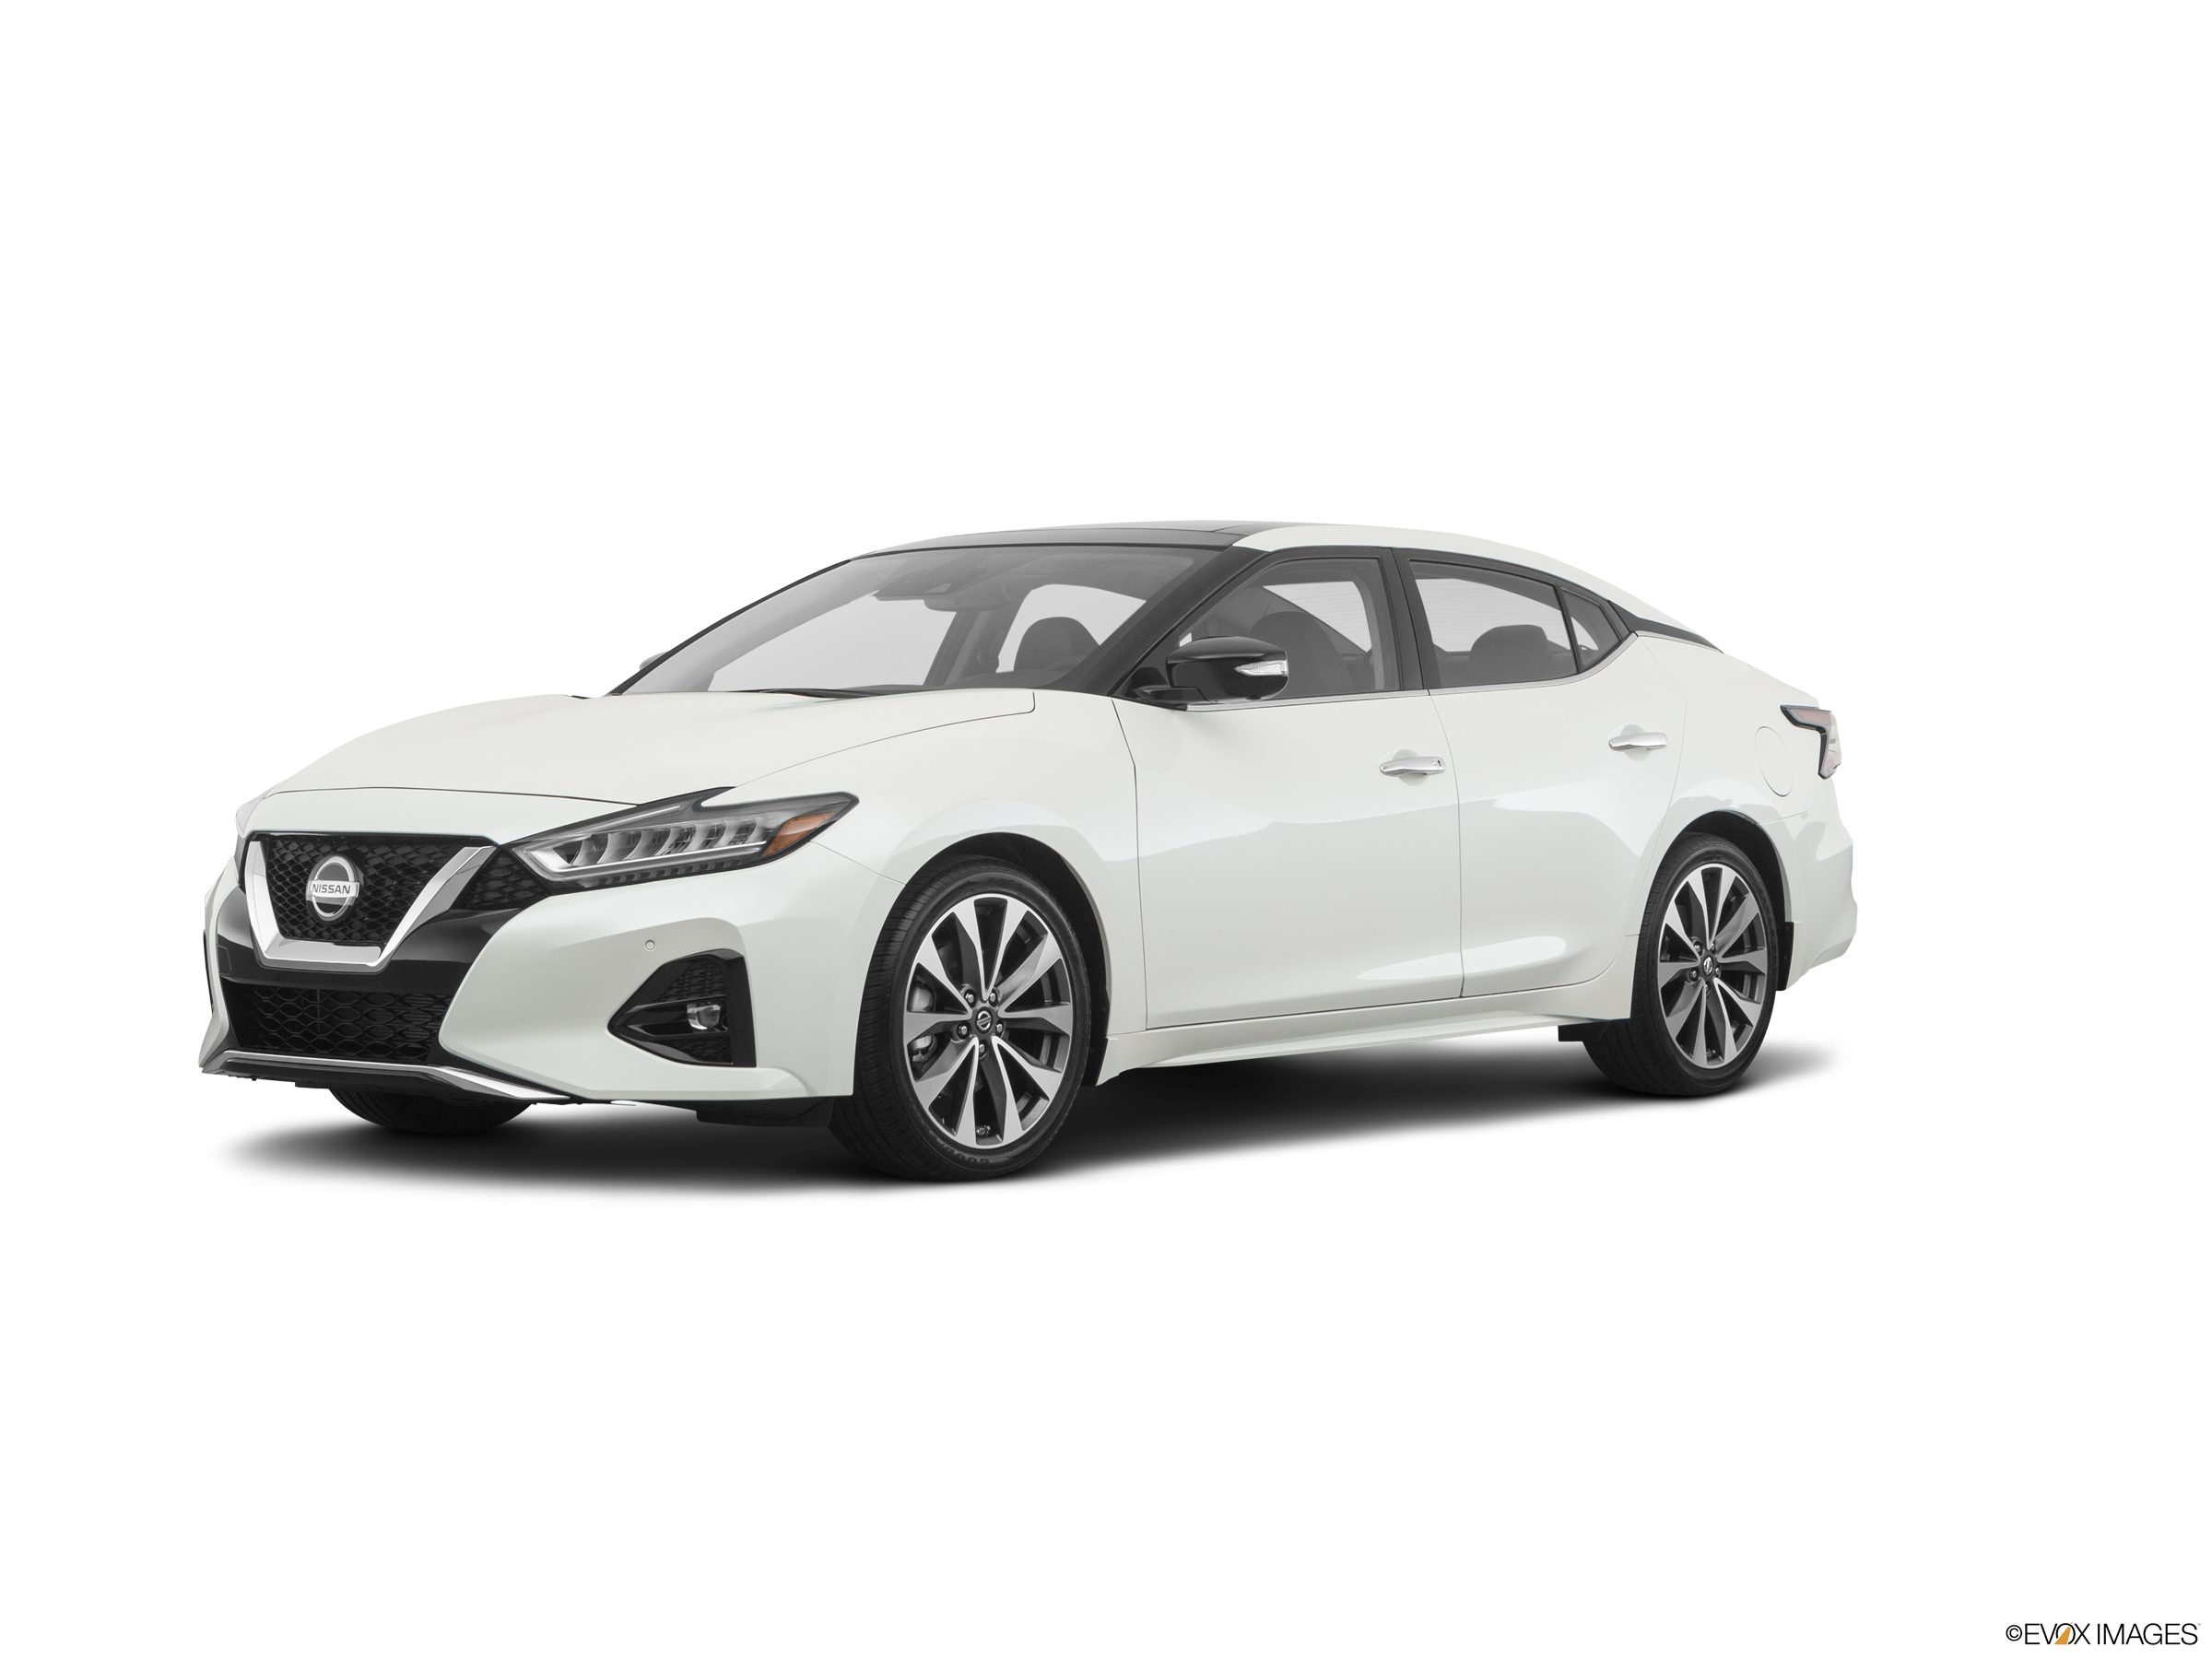 2021 Nissan Maxima Price, Value, Ratings & Reviews